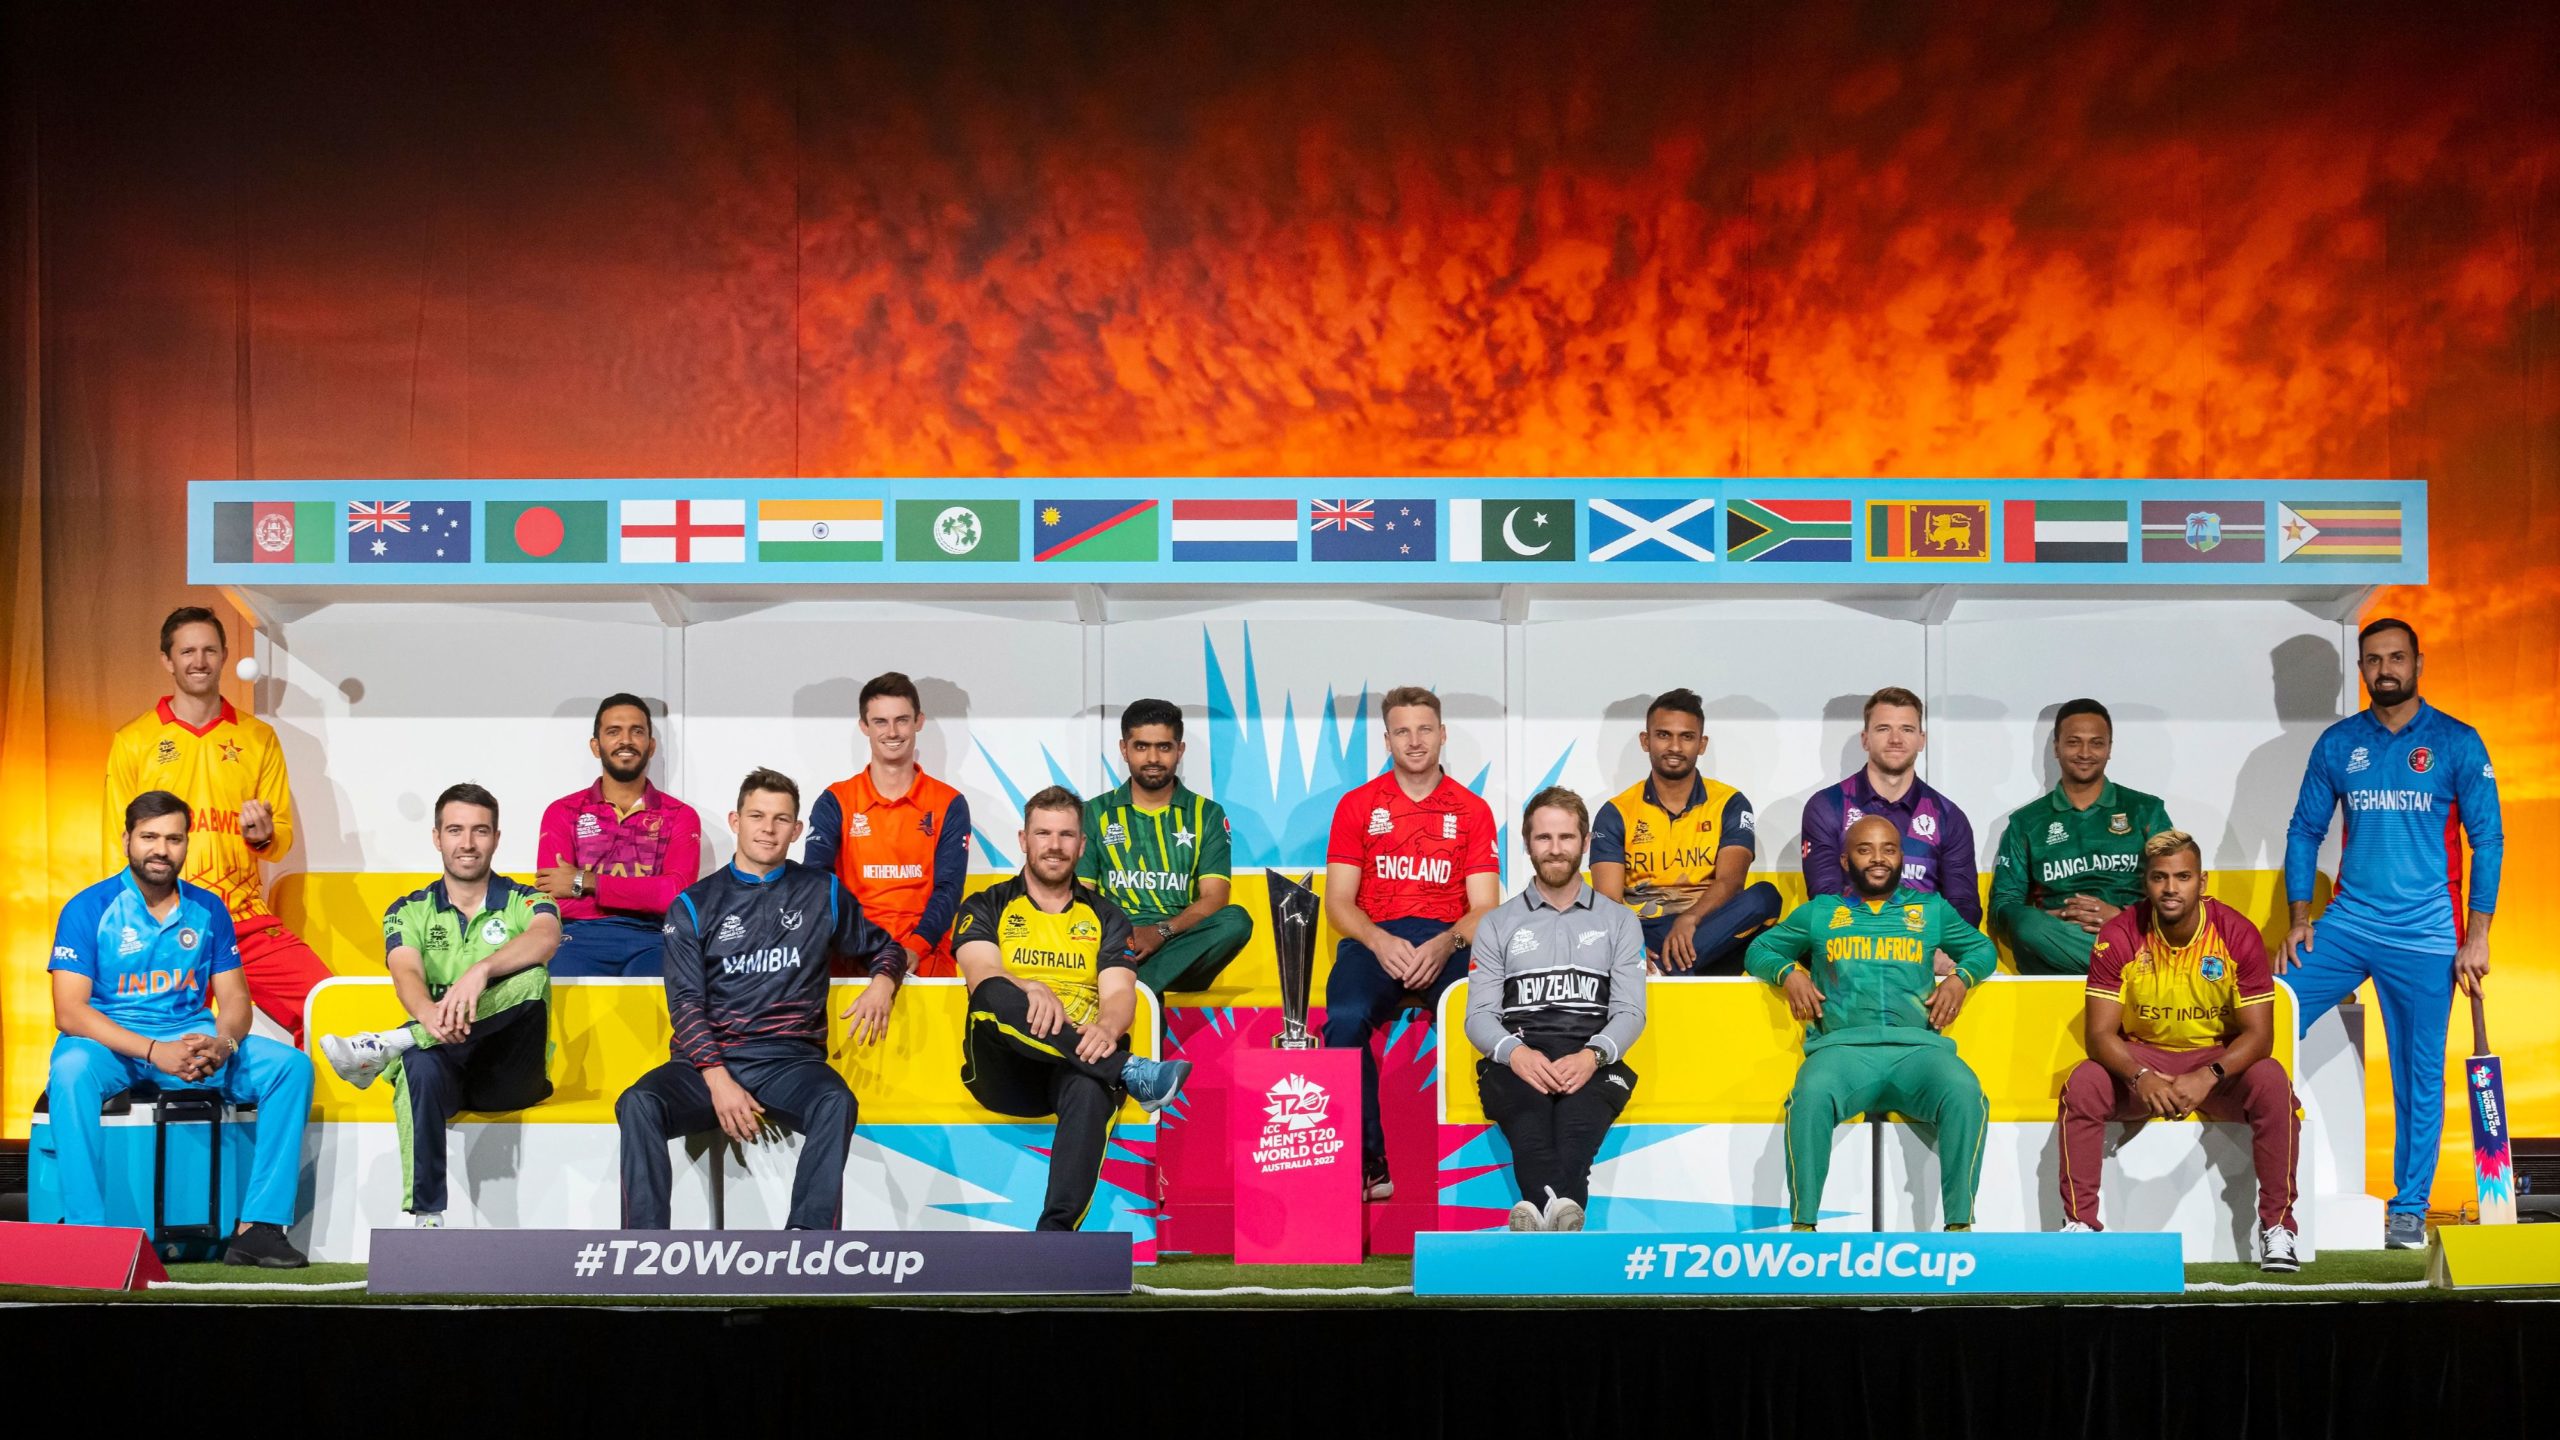 Captain's day lights up start of T20 World Cup